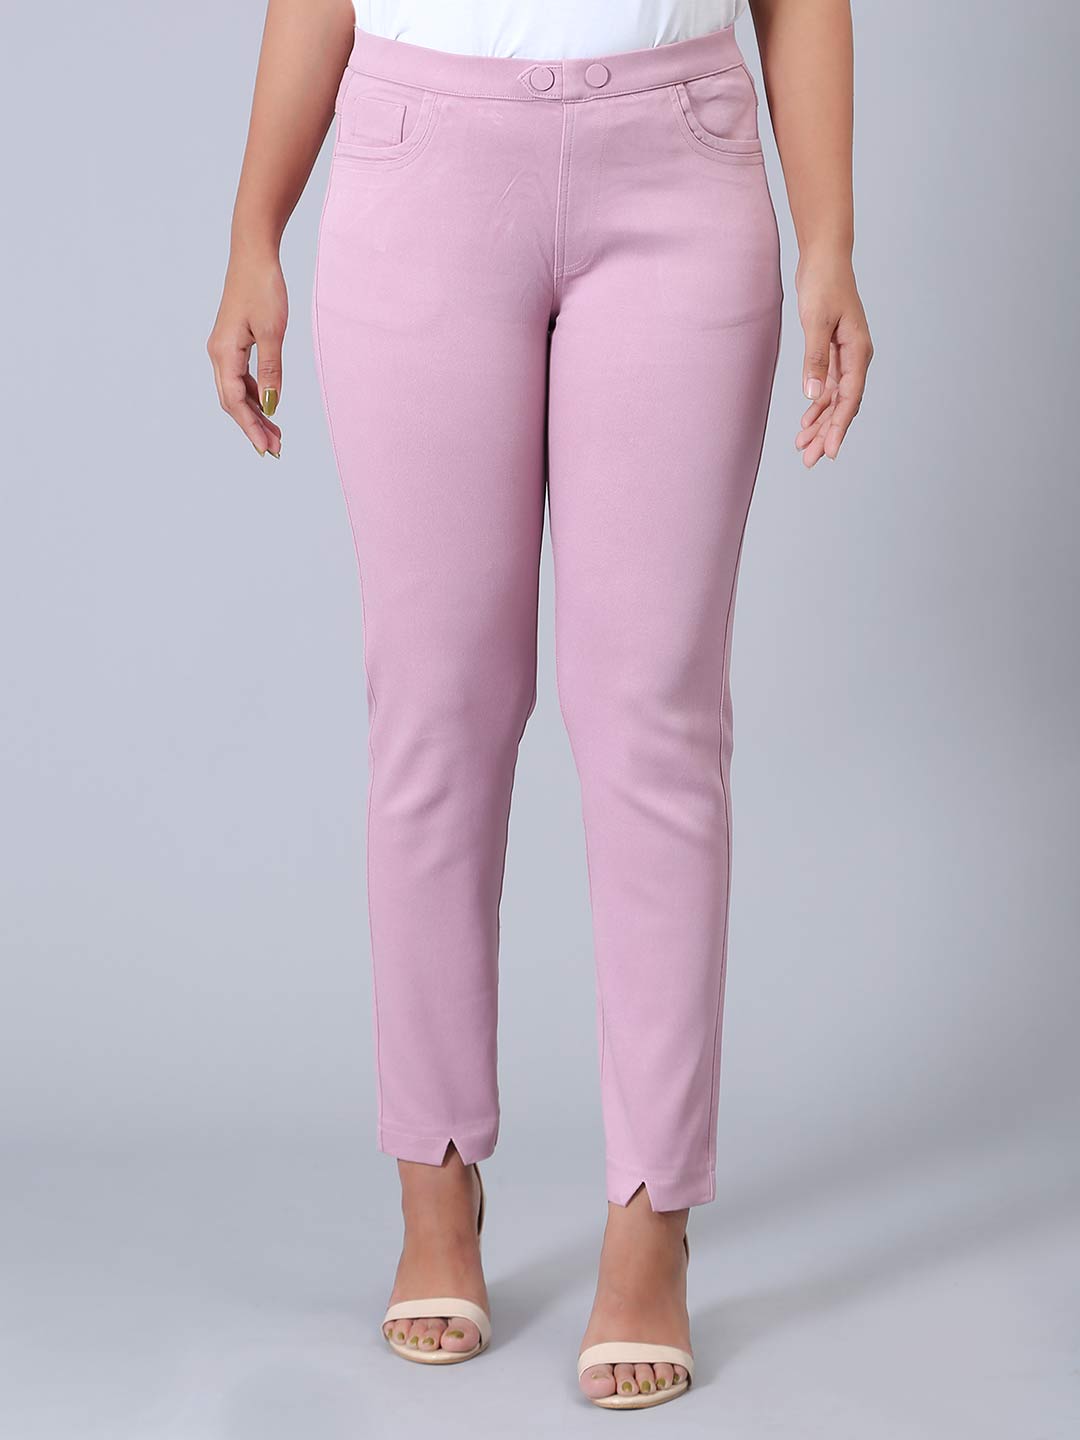 https://1099554485.rsc.cdn77.org/upload/products/cotton_casual_wear_pink_jeggings_1613480484as2047318_1.jpg